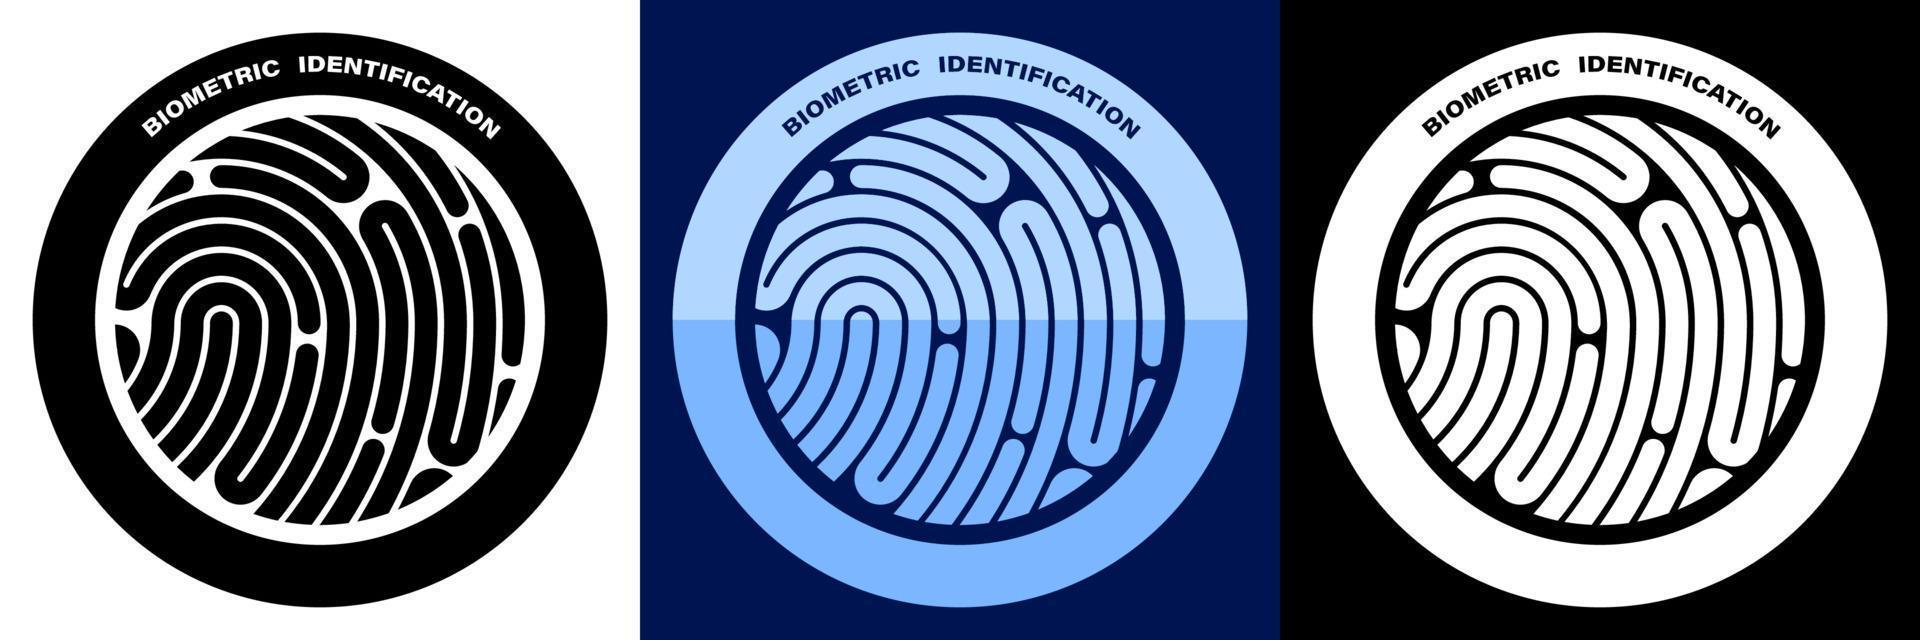 person digital fingerprint icon for mobile identification apps. Biometric identification of human data. Unique pattern on finger. Search devices for scanning data. Vector